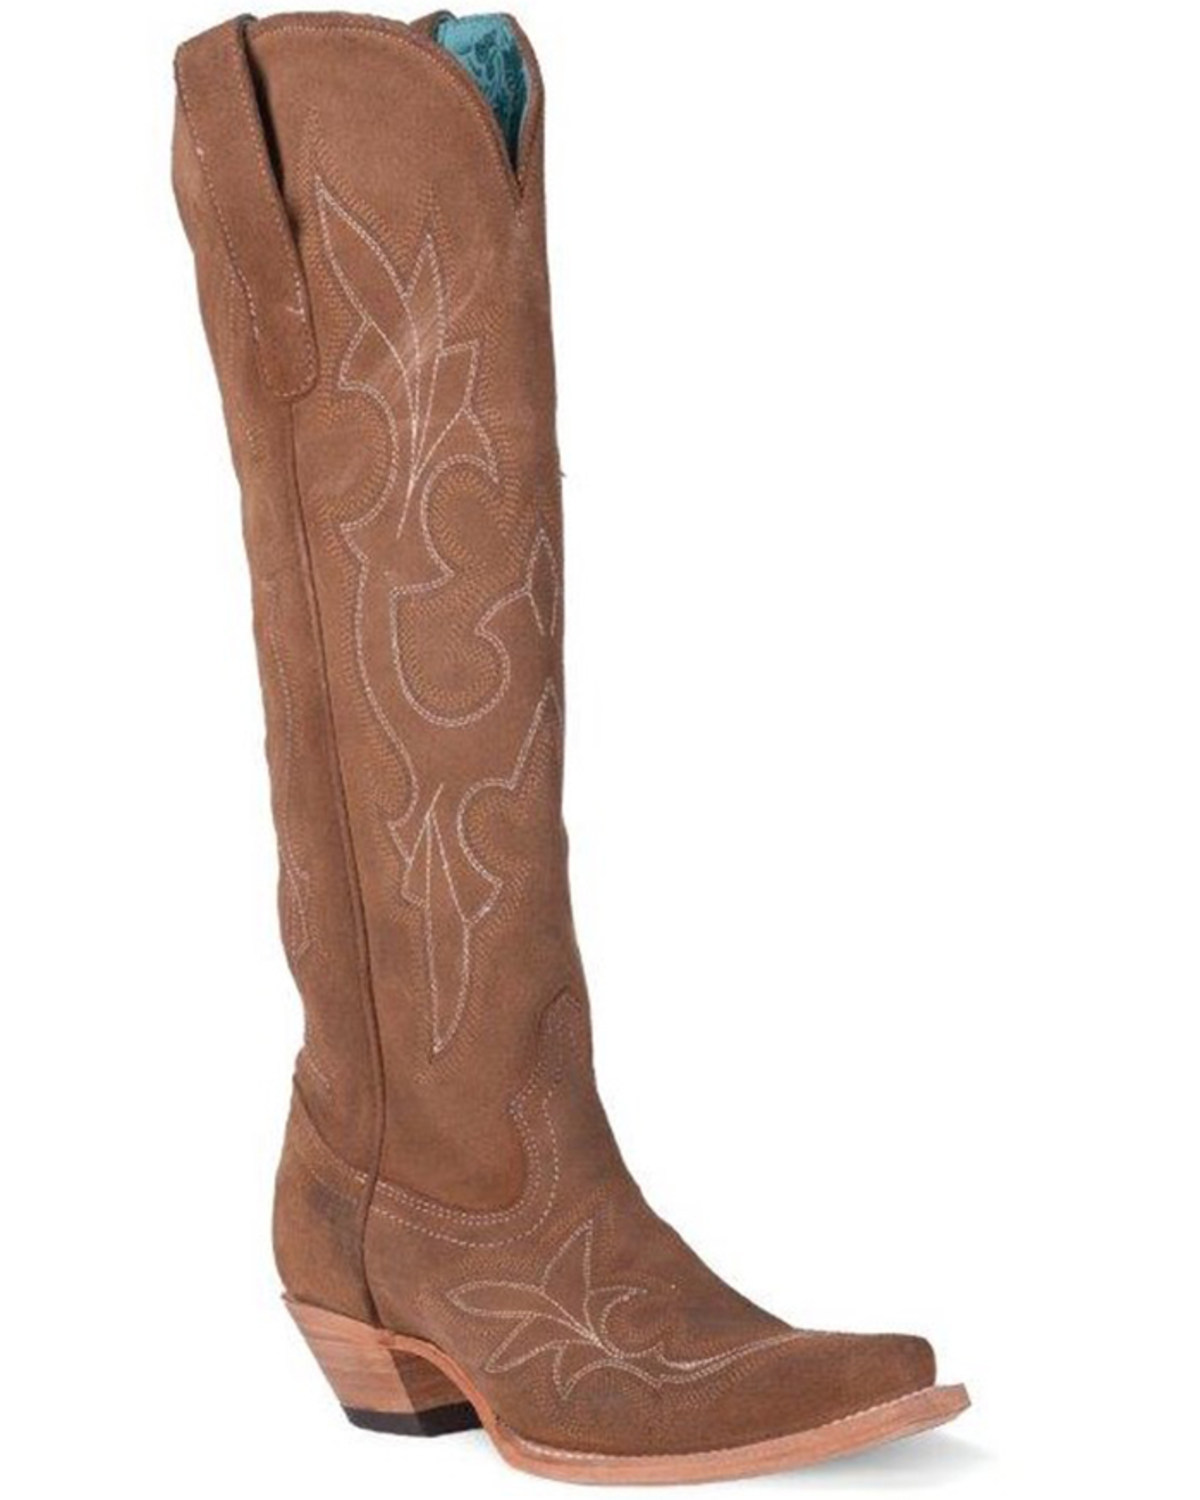 Corral Women's Suede Embroidered Tall Western Boots - Snip Toe